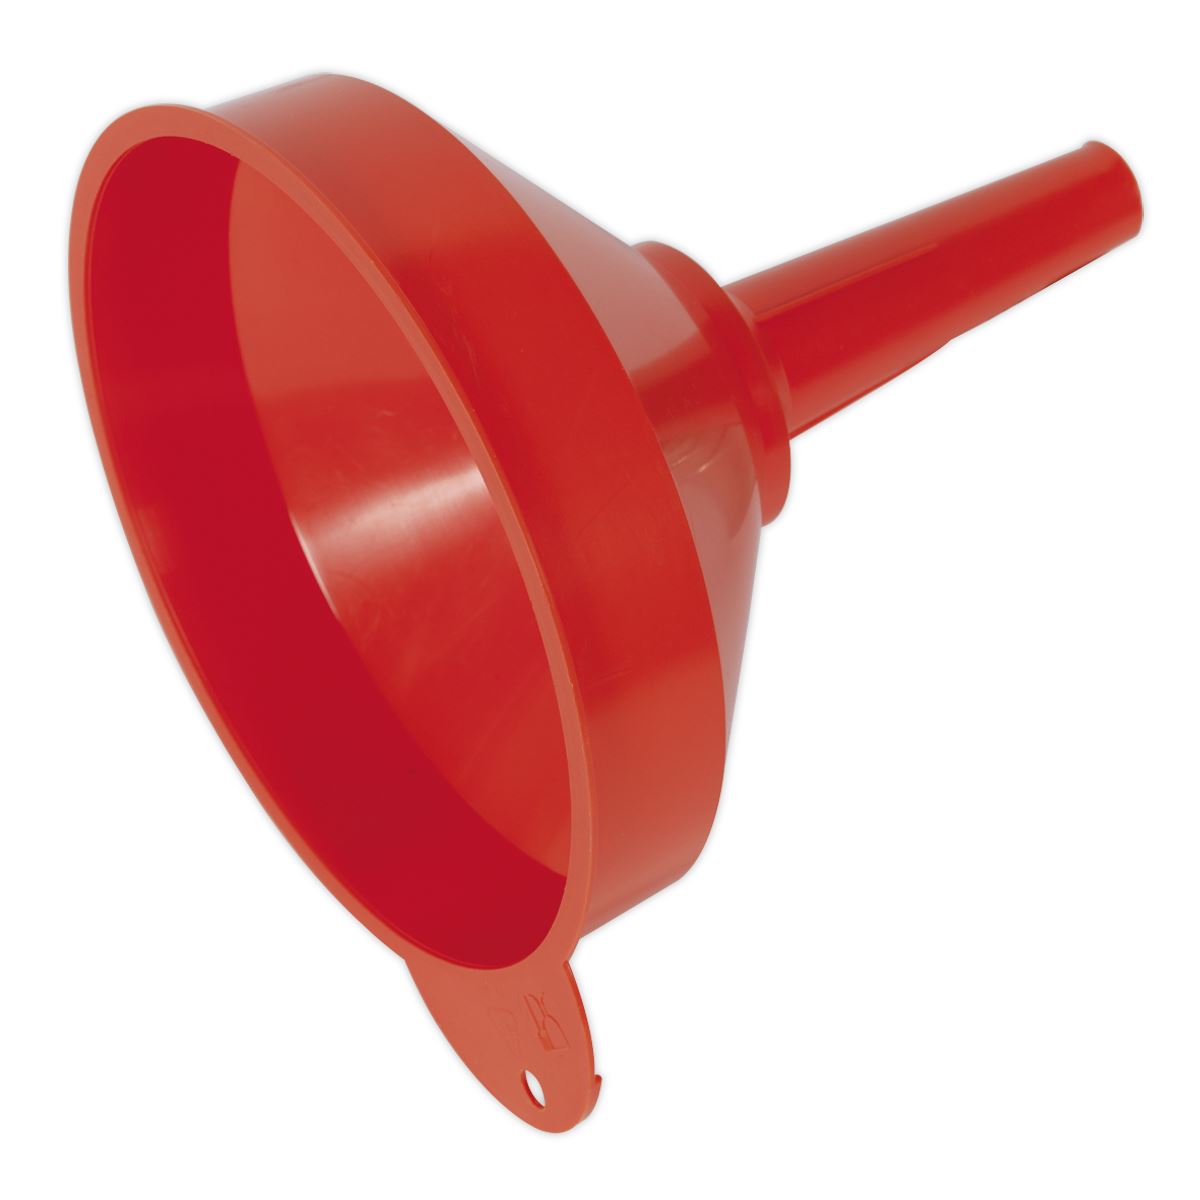 Sealey Funnel Medium Ø200mm Fixed Spout with Filter